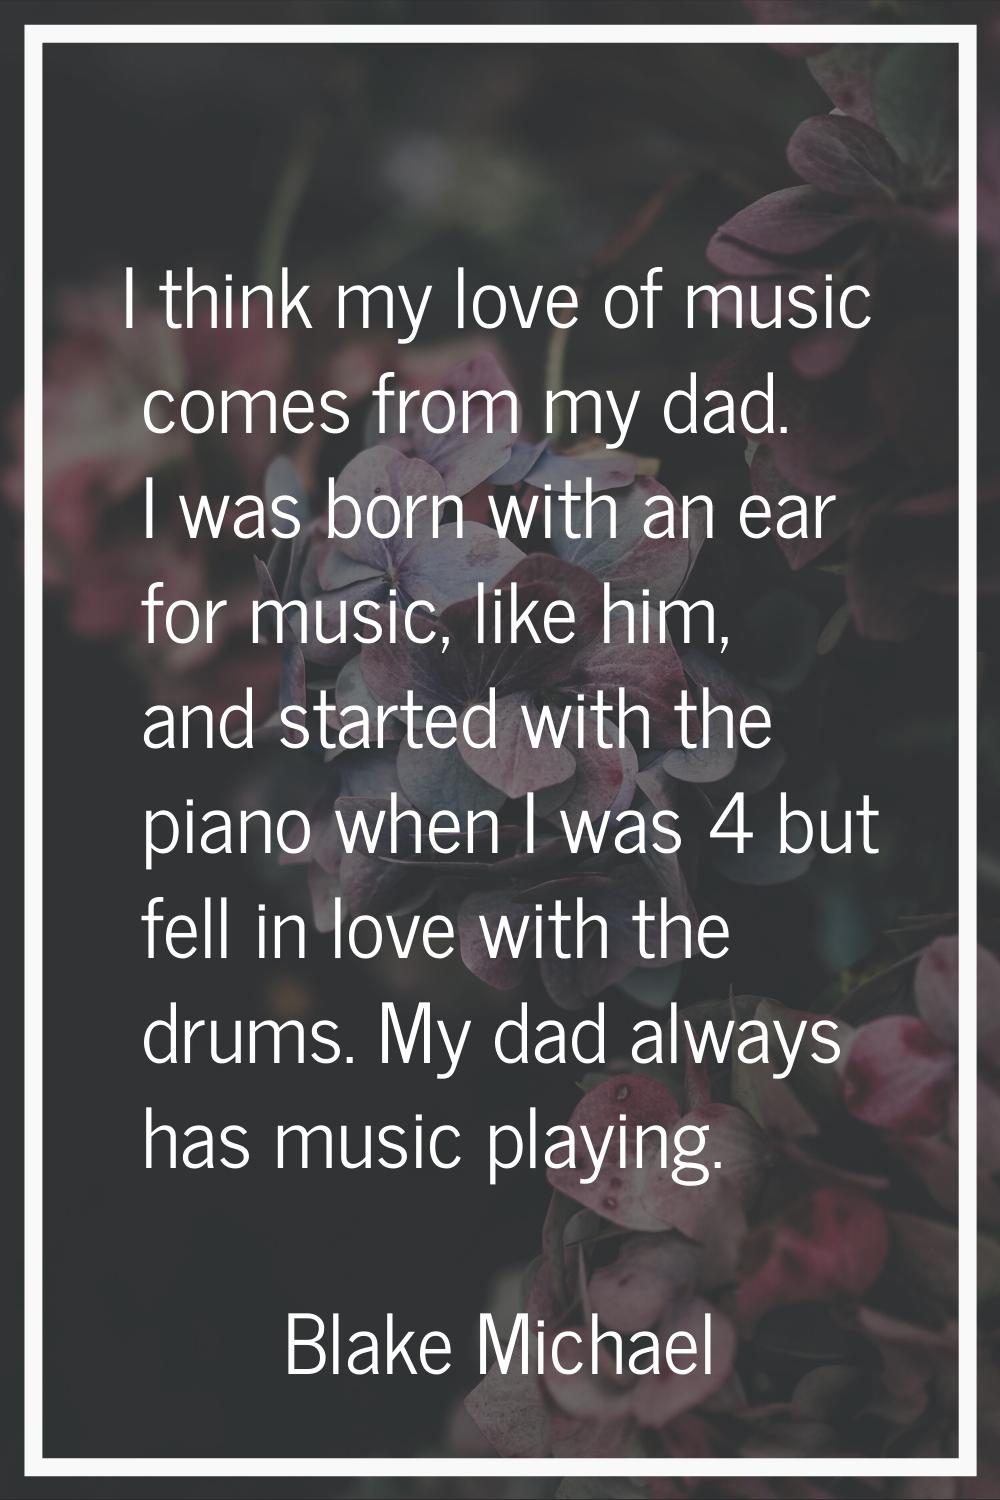 I think my love of music comes from my dad. I was born with an ear for music, like him, and started